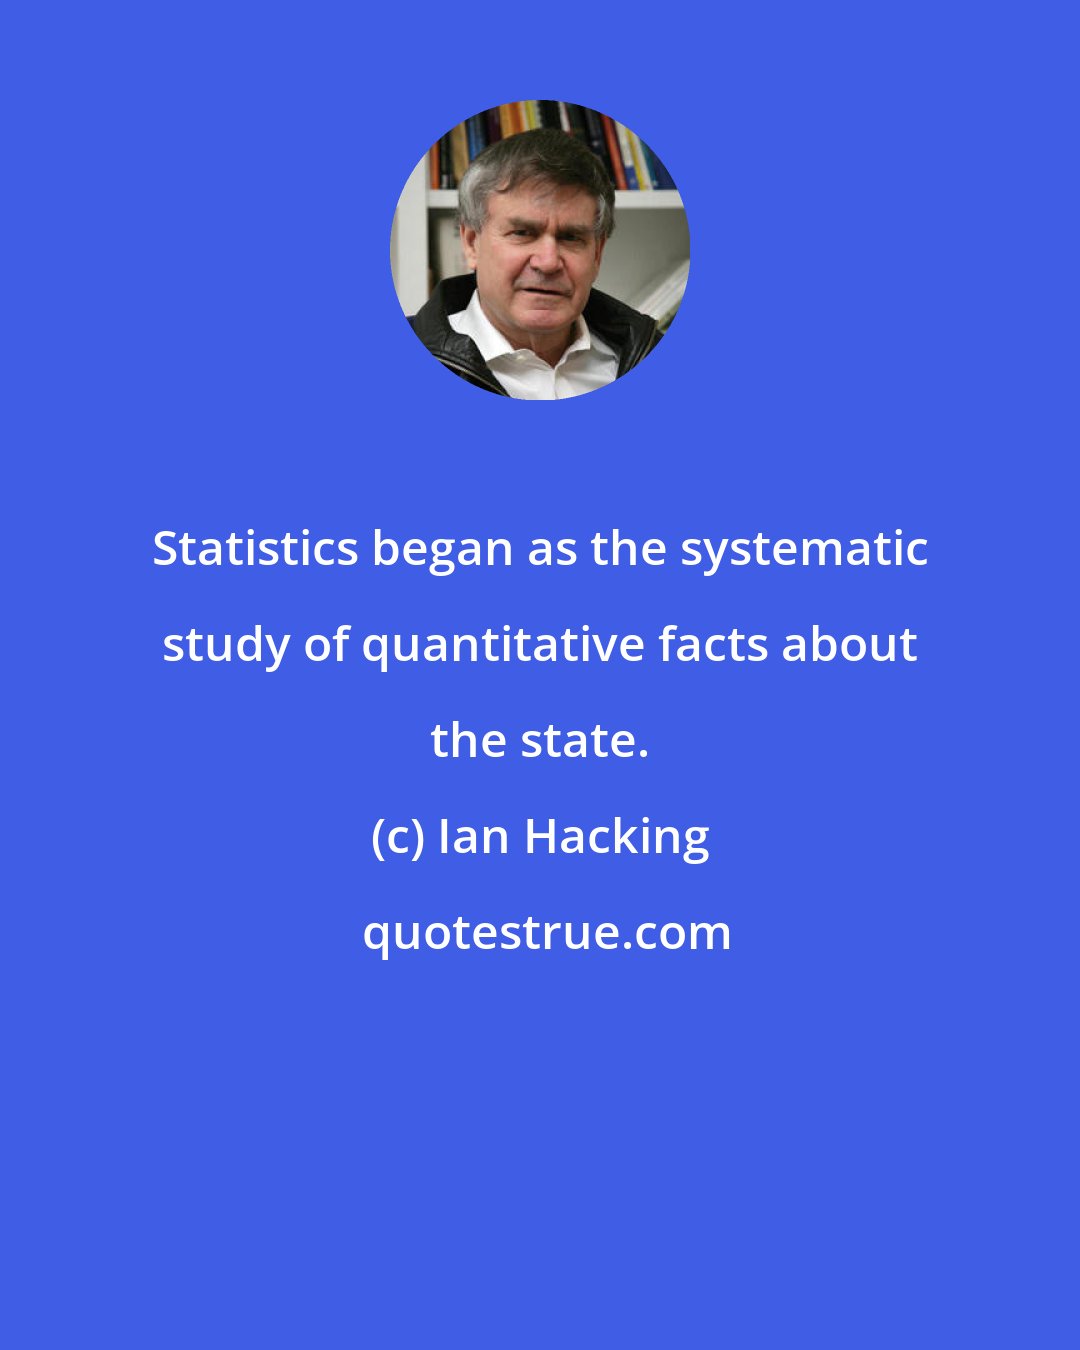 Ian Hacking: Statistics began as the systematic study of quantitative facts about the state.